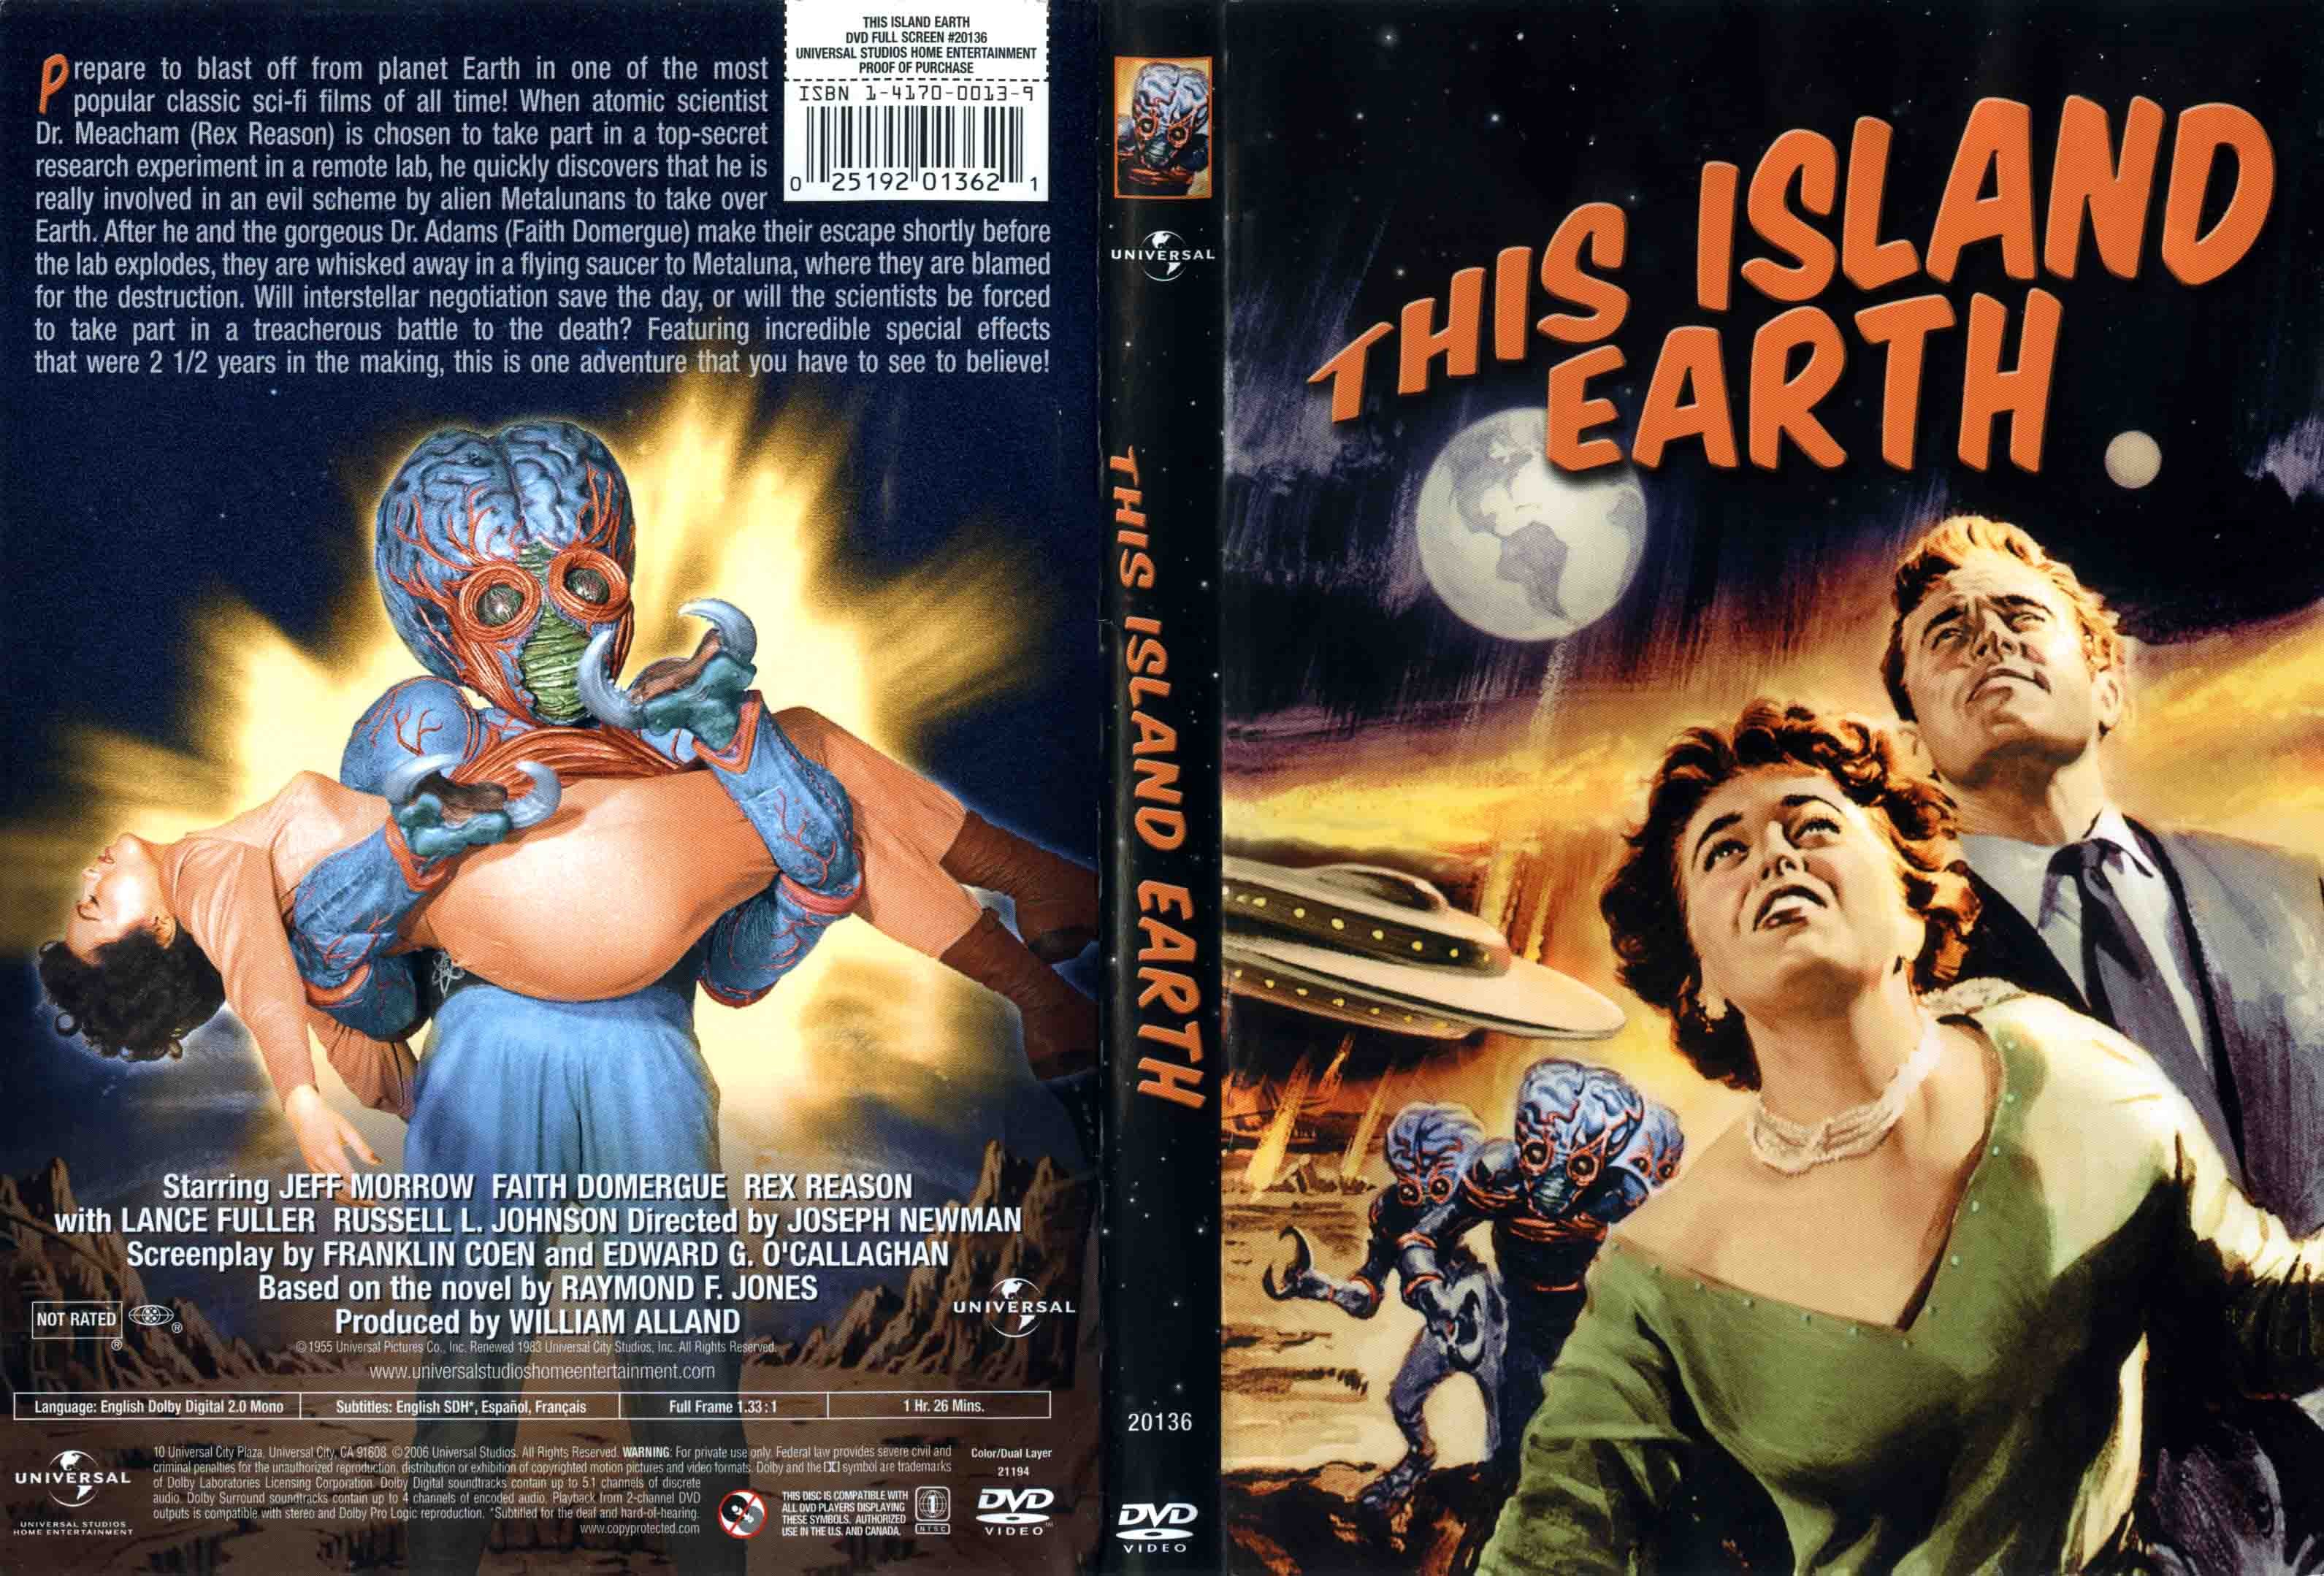 Jaquette DVD This Island Earth